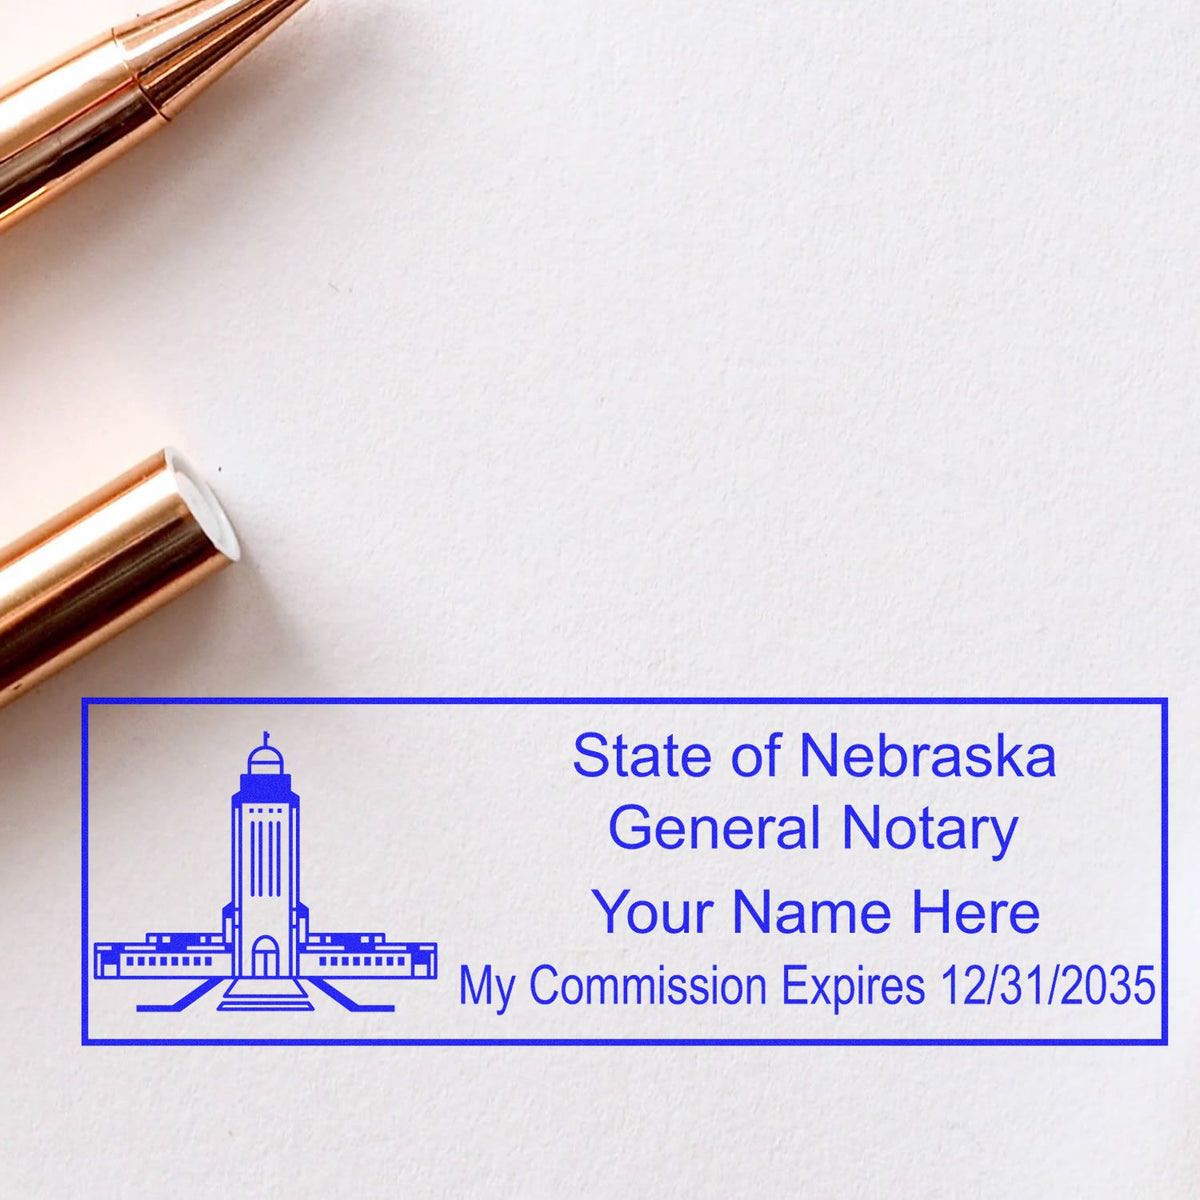 This paper is stamped with a sample imprint of the Slim Pre-Inked State Seal Notary Stamp for Nebraska, signifying its quality and reliability.